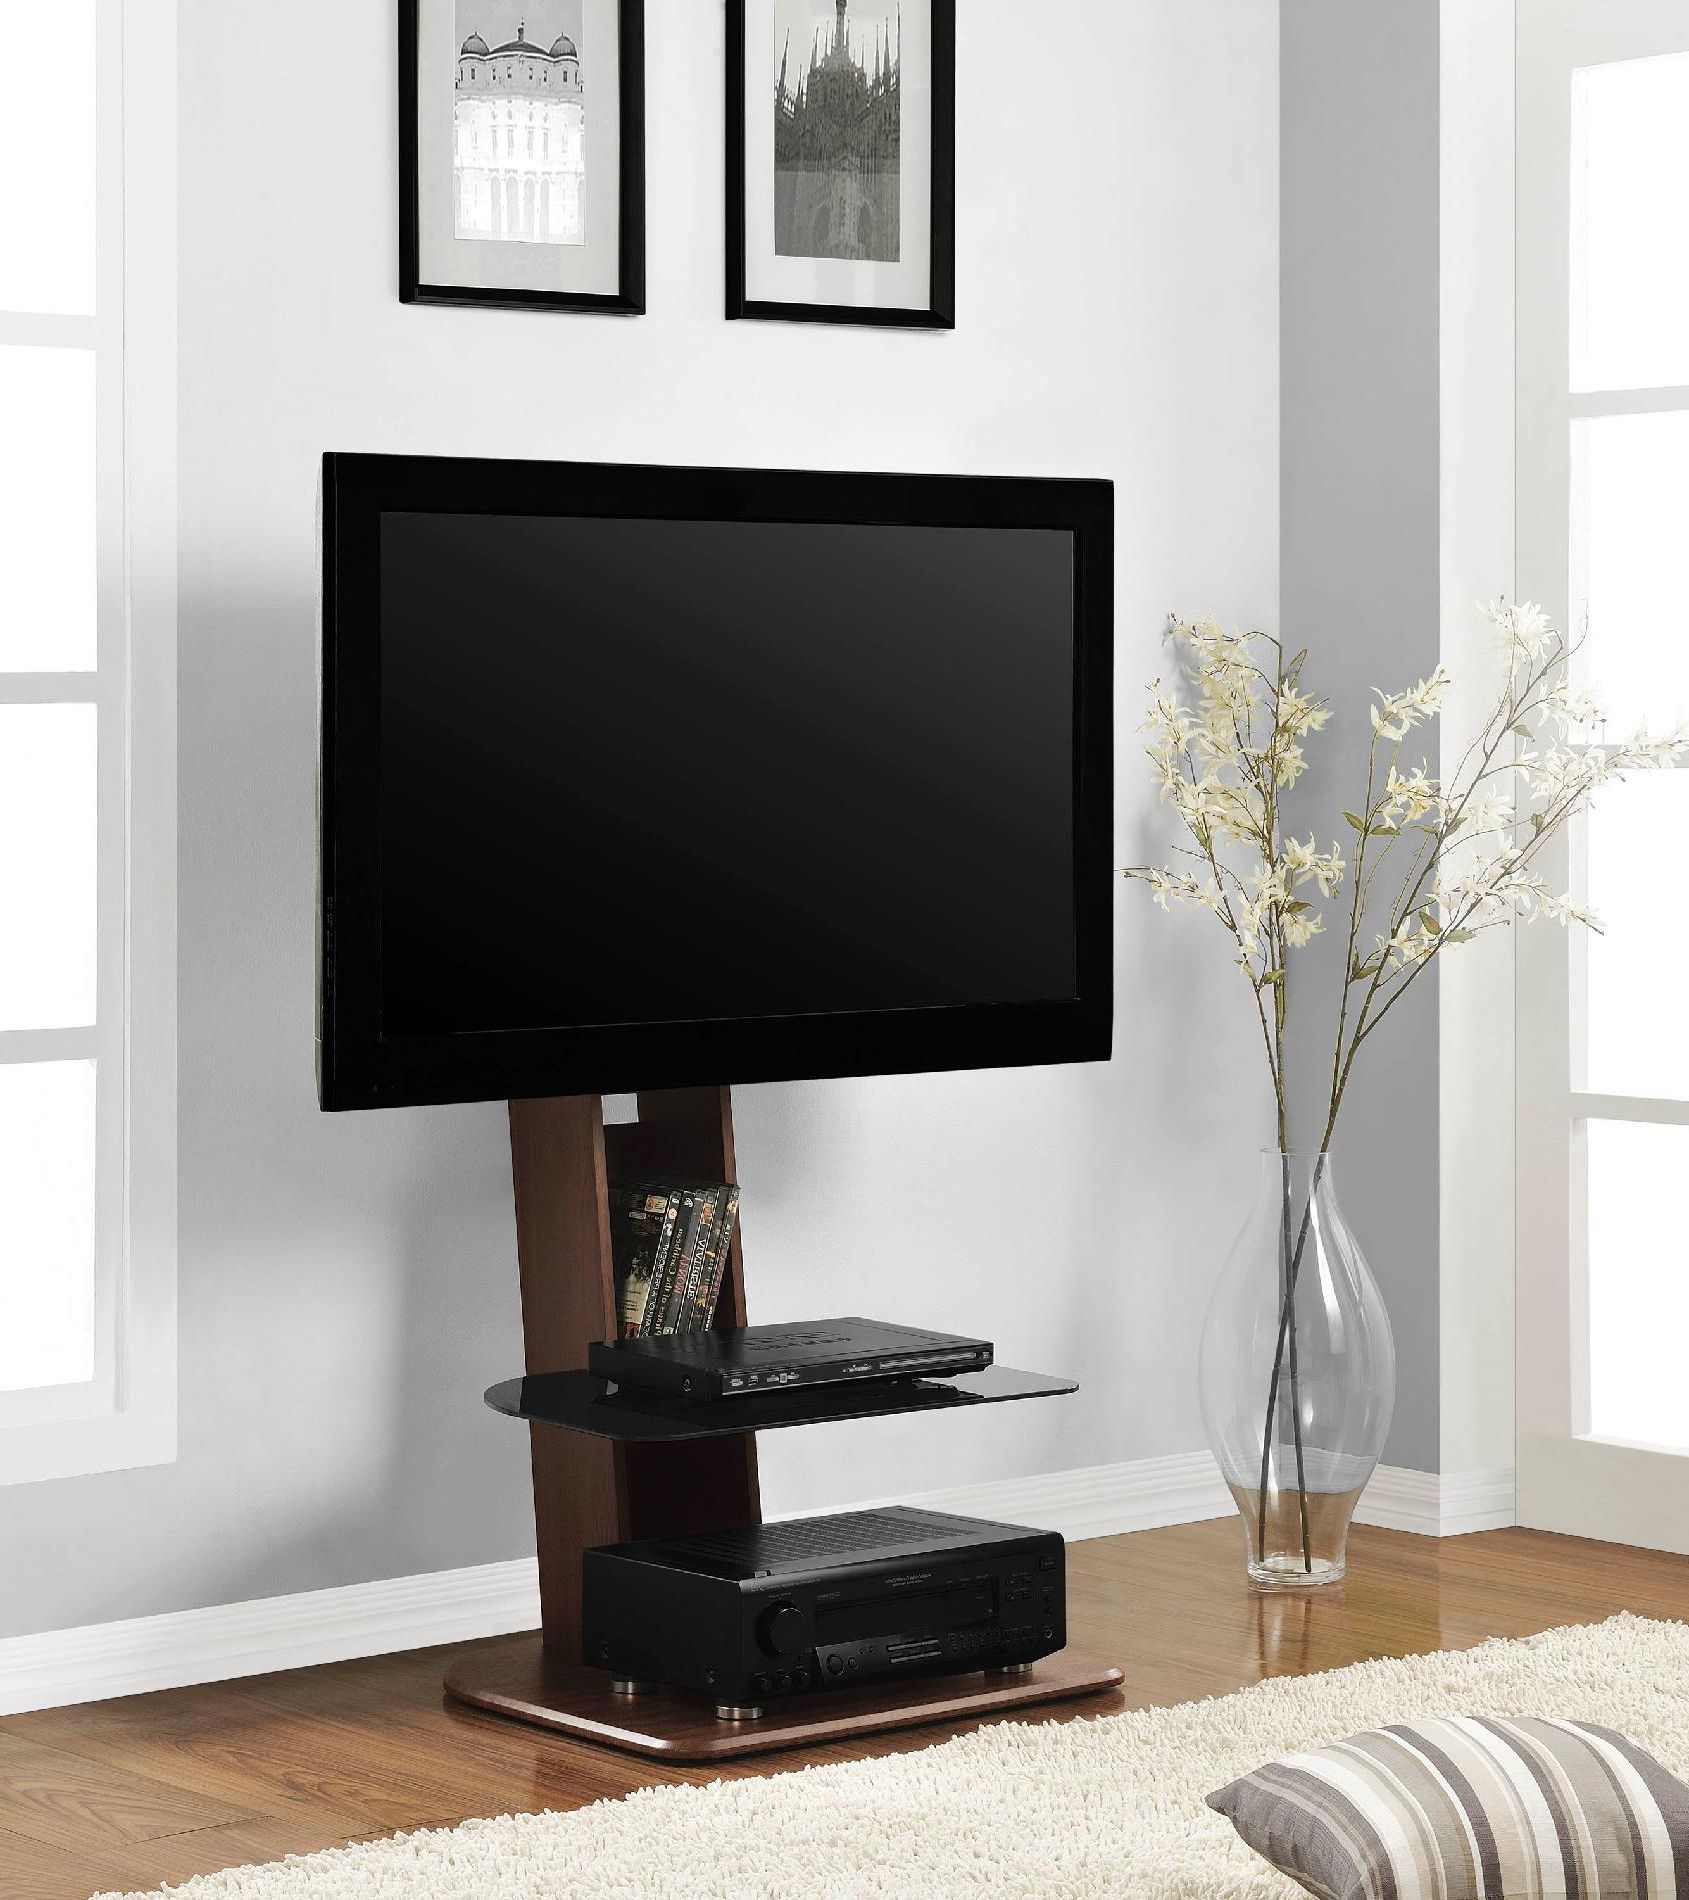 Well Liked Corner Tv Cabinets For Flat Screens With Doors Intended For 60 Inch Corner Tv Stand With Fireplace Cabinet Doors For 50 White (View 3 of 20)